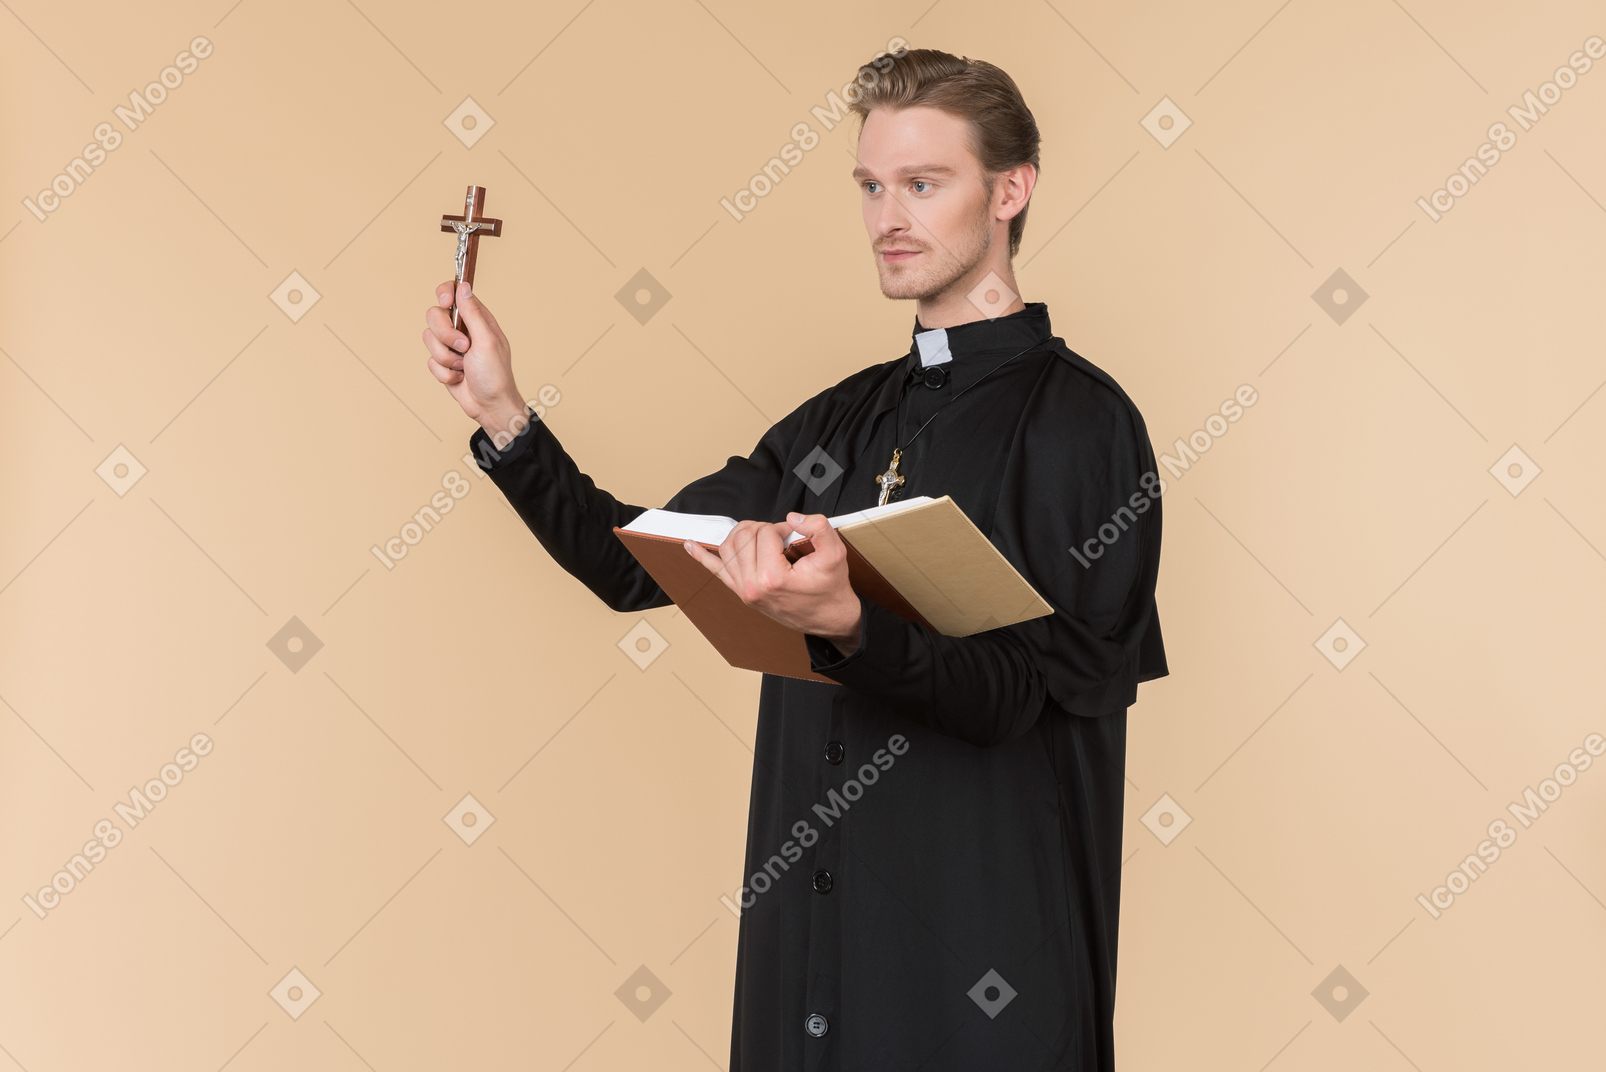 Catholic priest holding cross and reading a bible